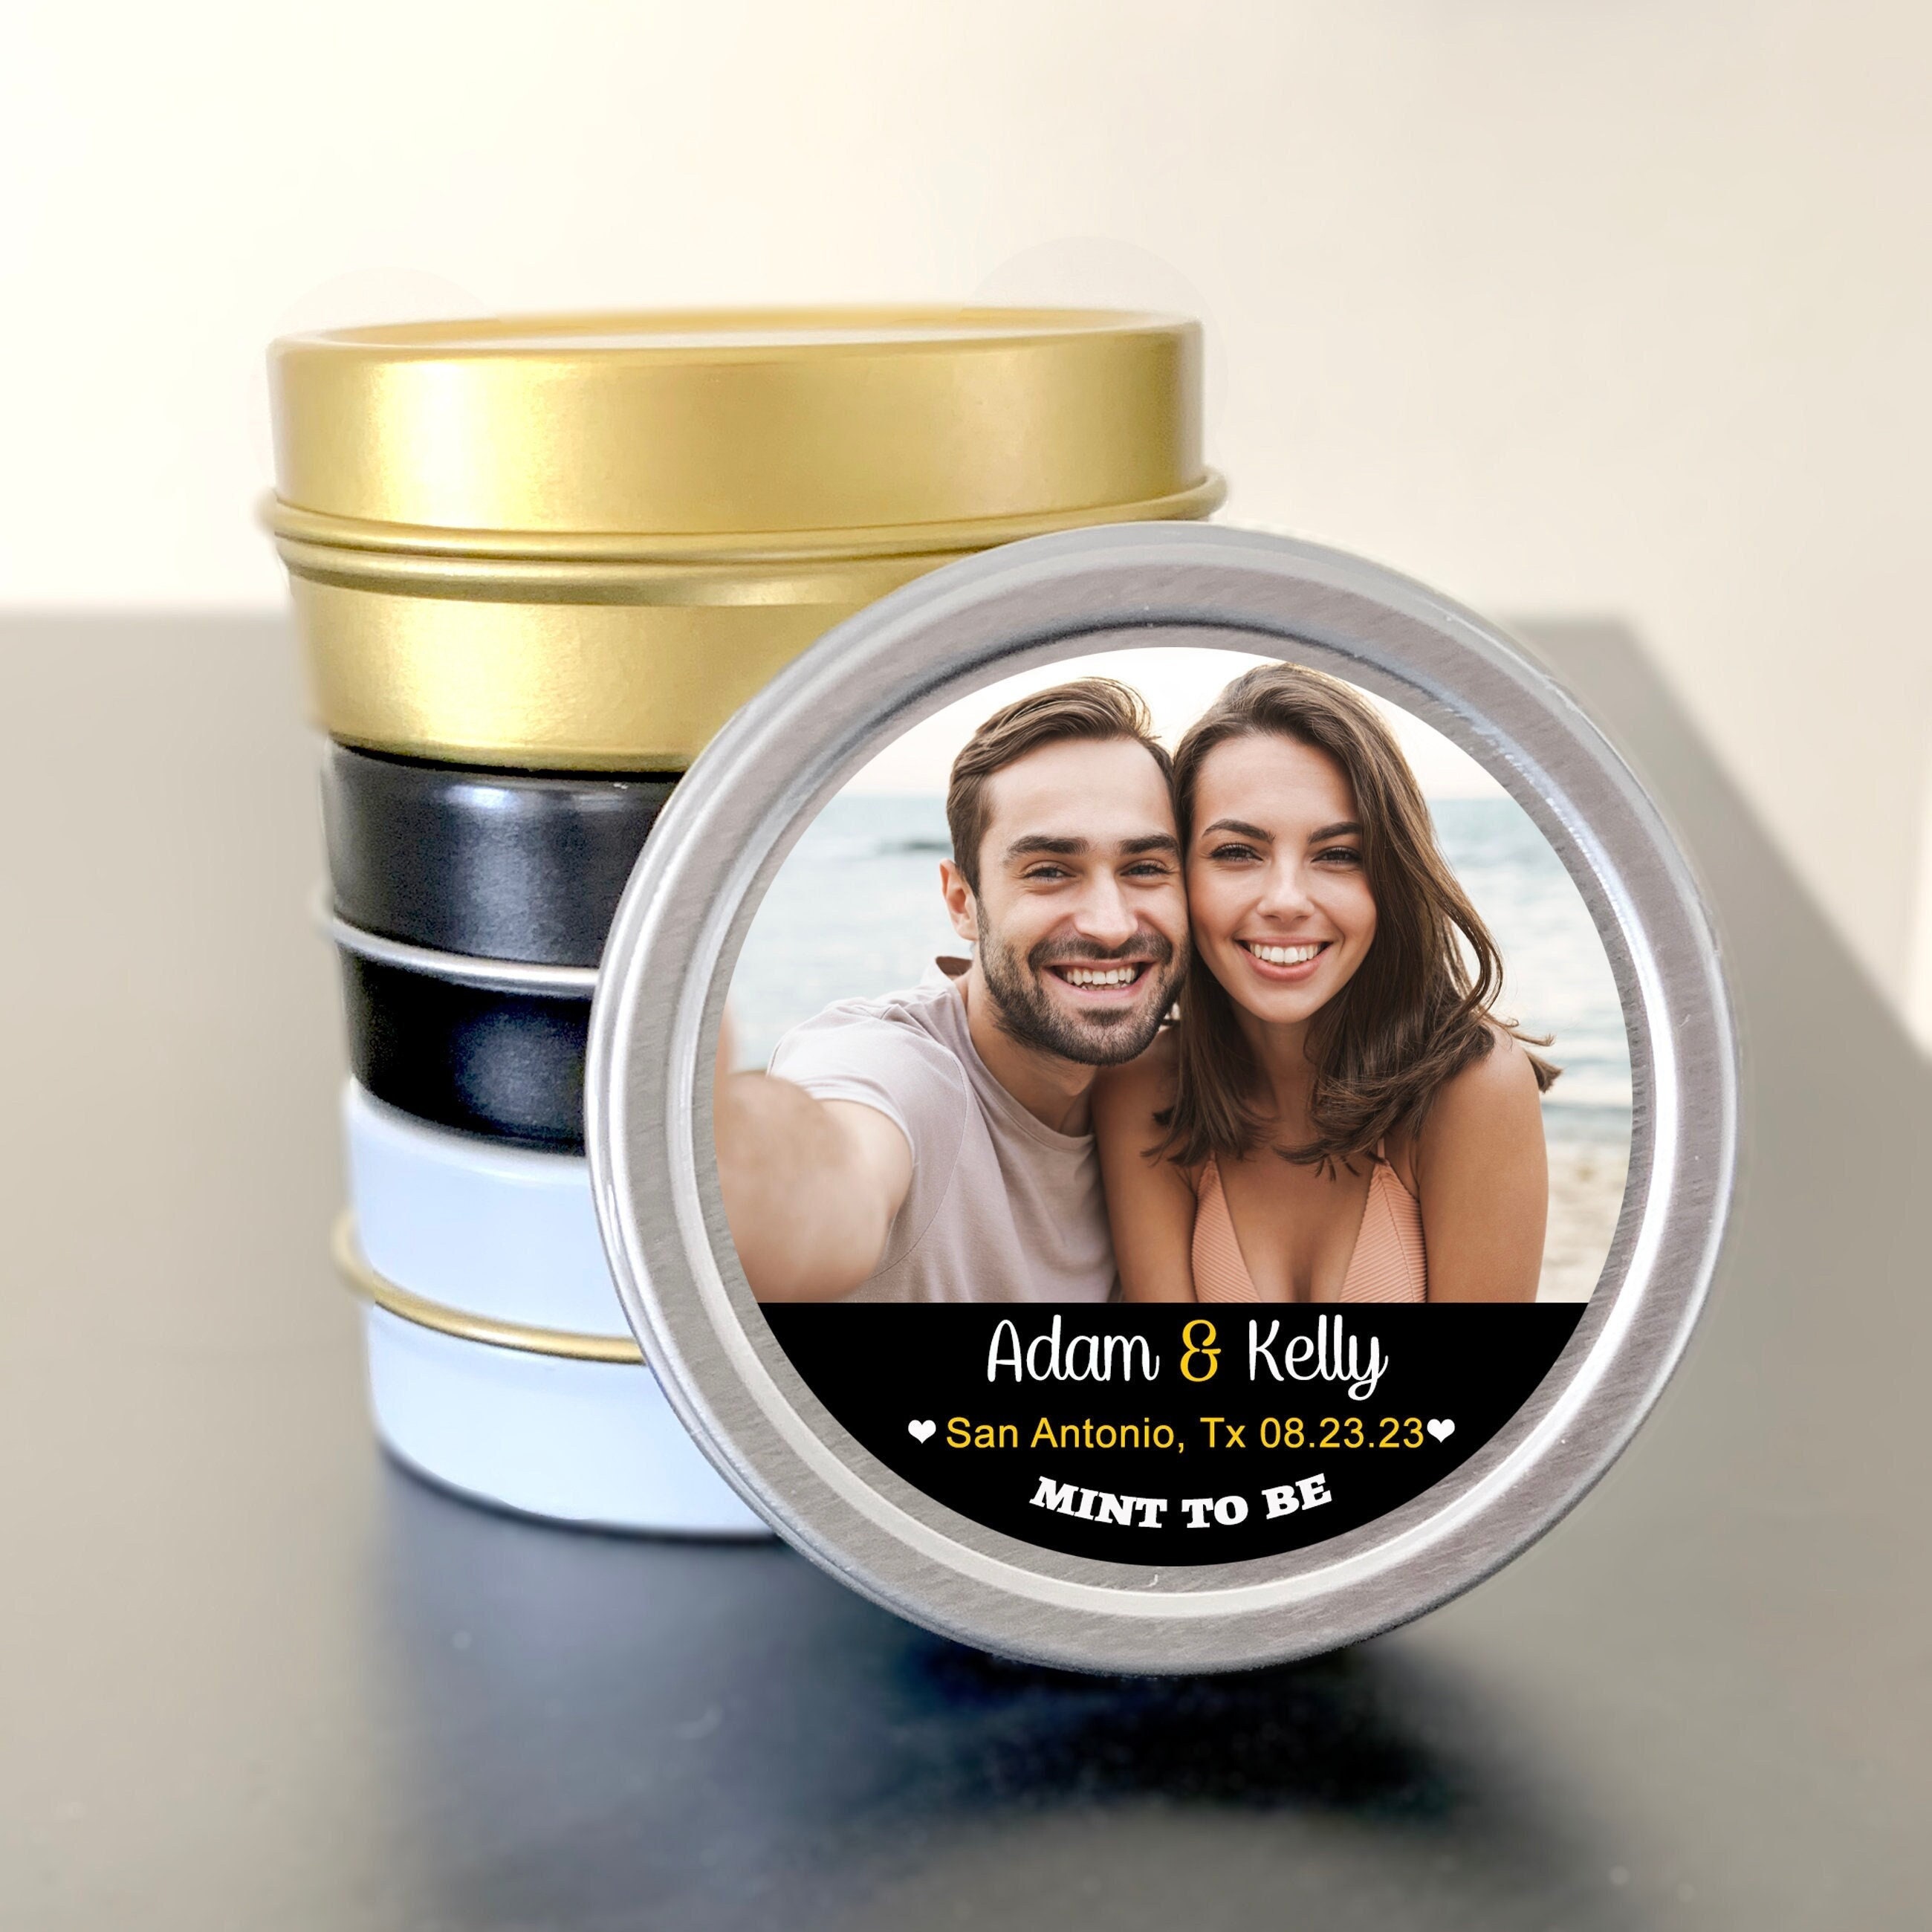 Personalized Photo Mint to Be Wedding Favor Tin Mints, Weddings, Rehearsal  Dinner Favors, Available in Black, Gold, White or Silver Tins -  Canada